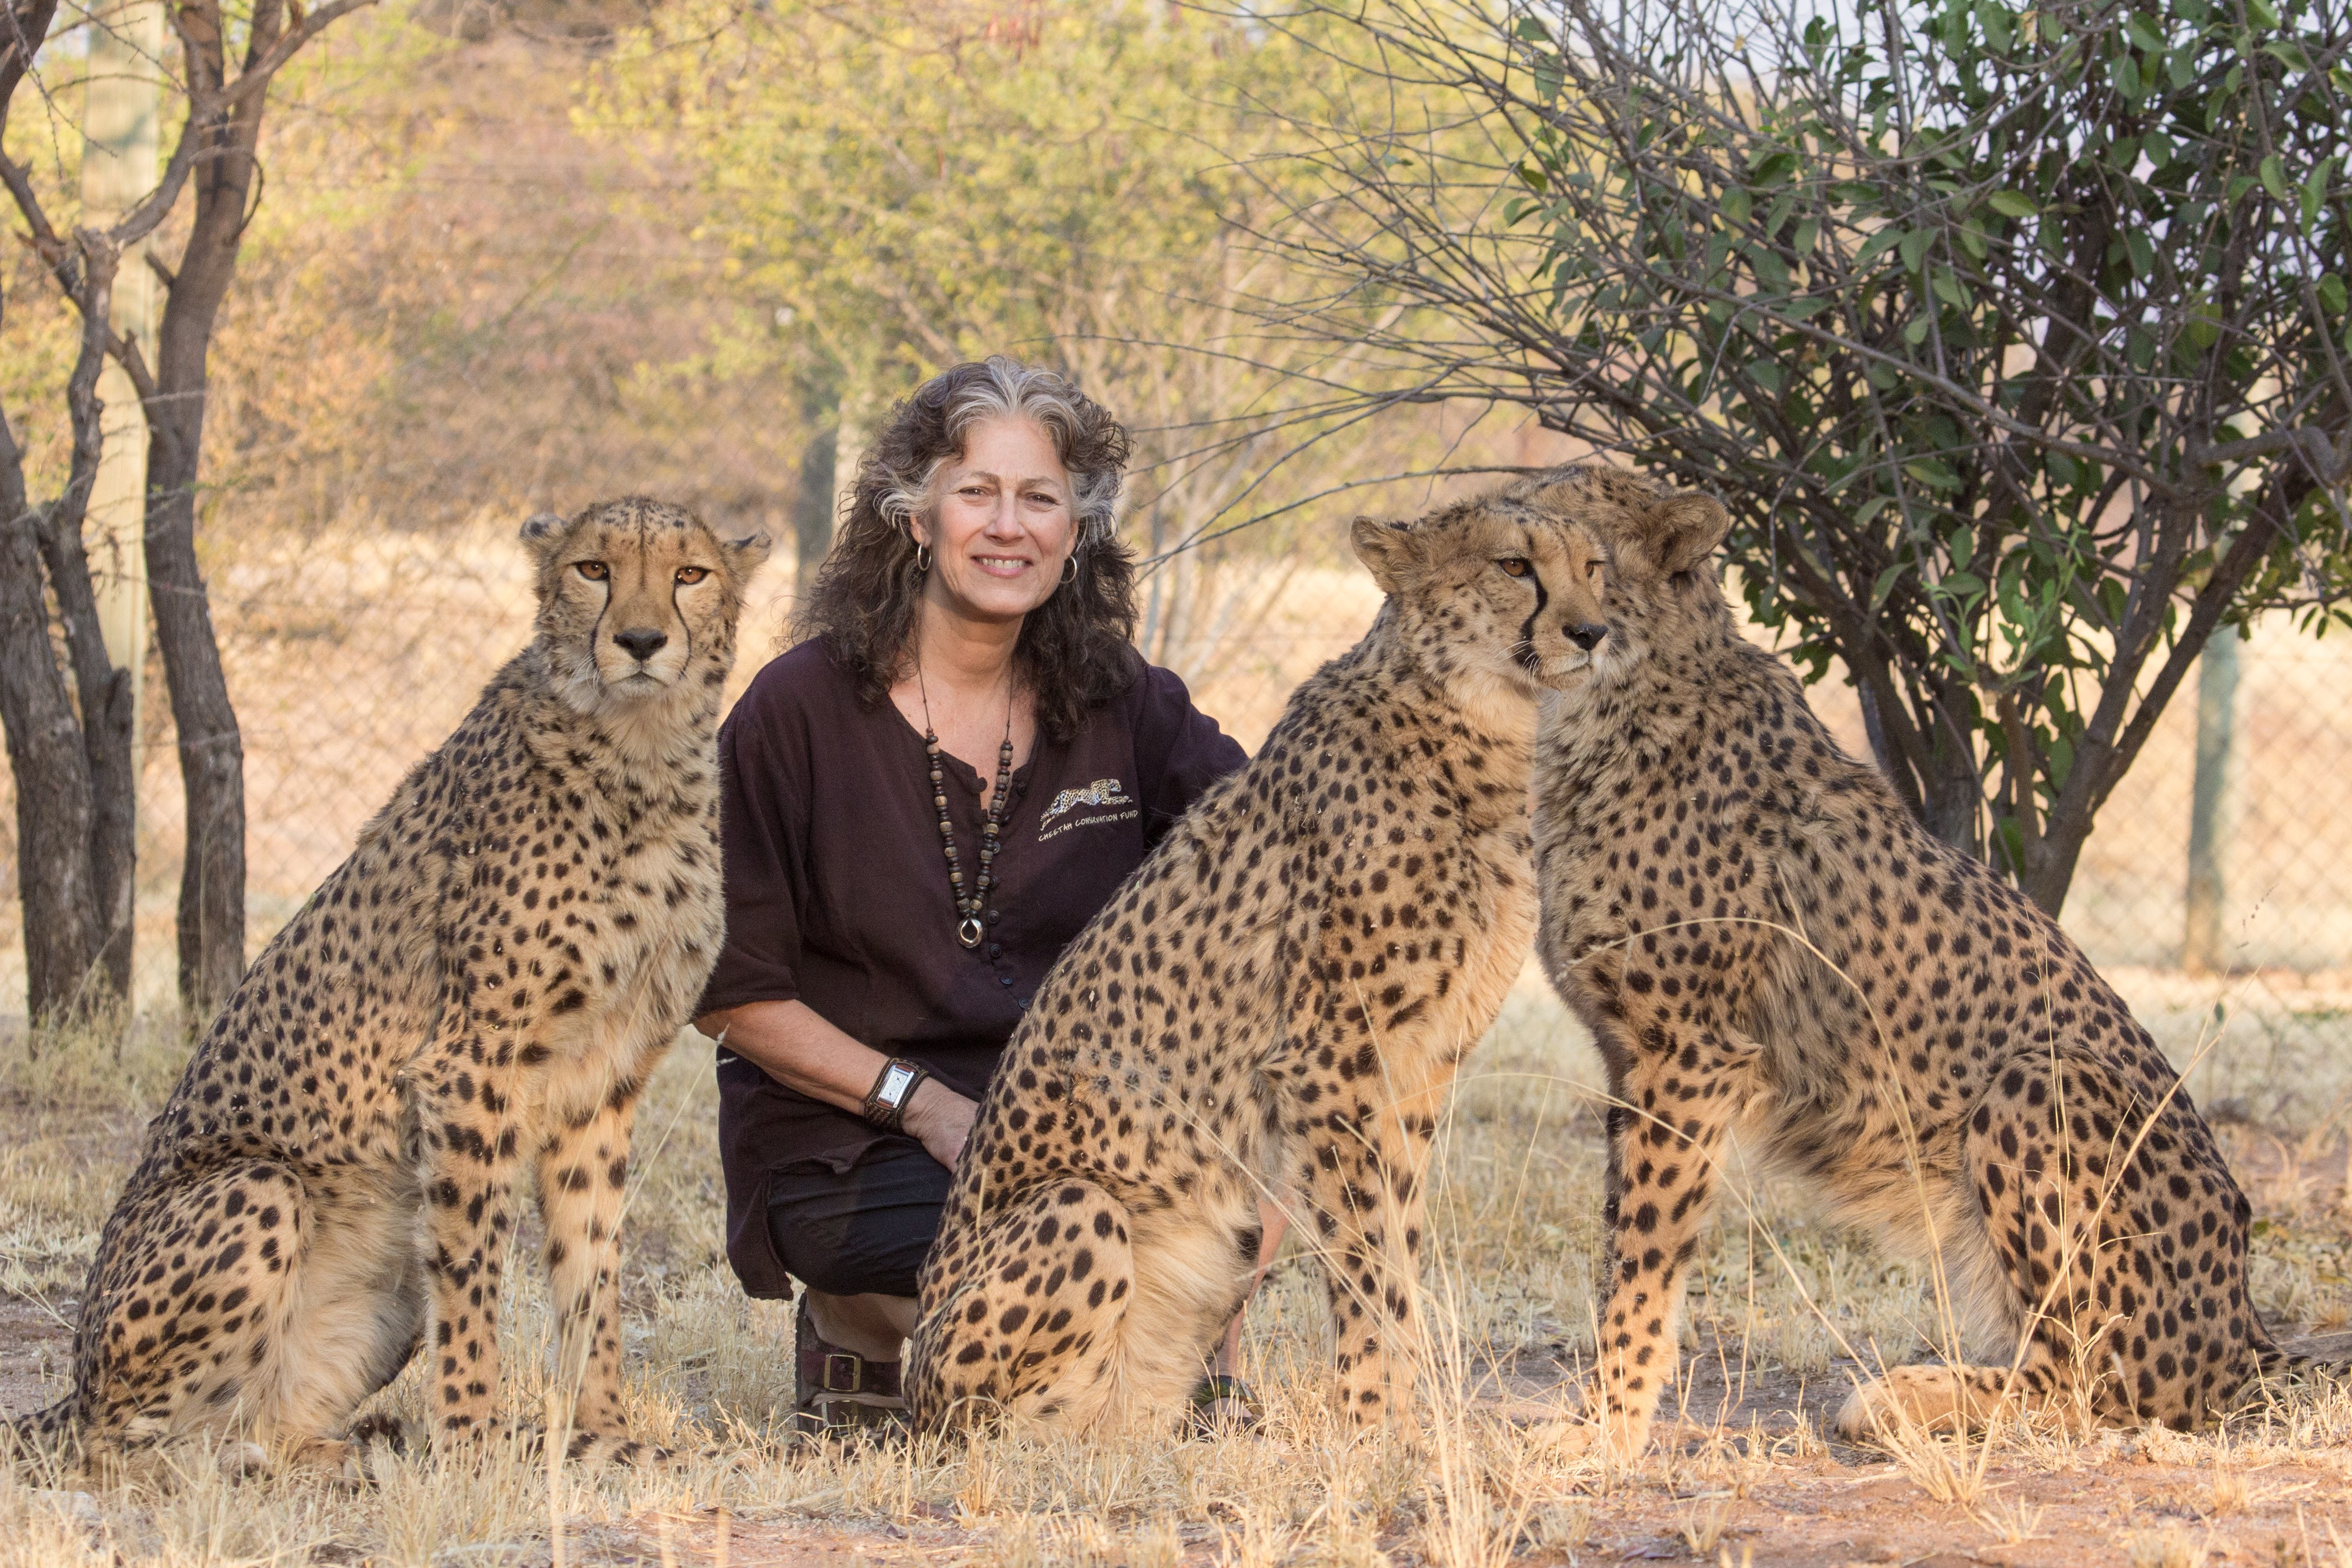 Dr. Laurie Marker and CCF Cheetah Ambassadors